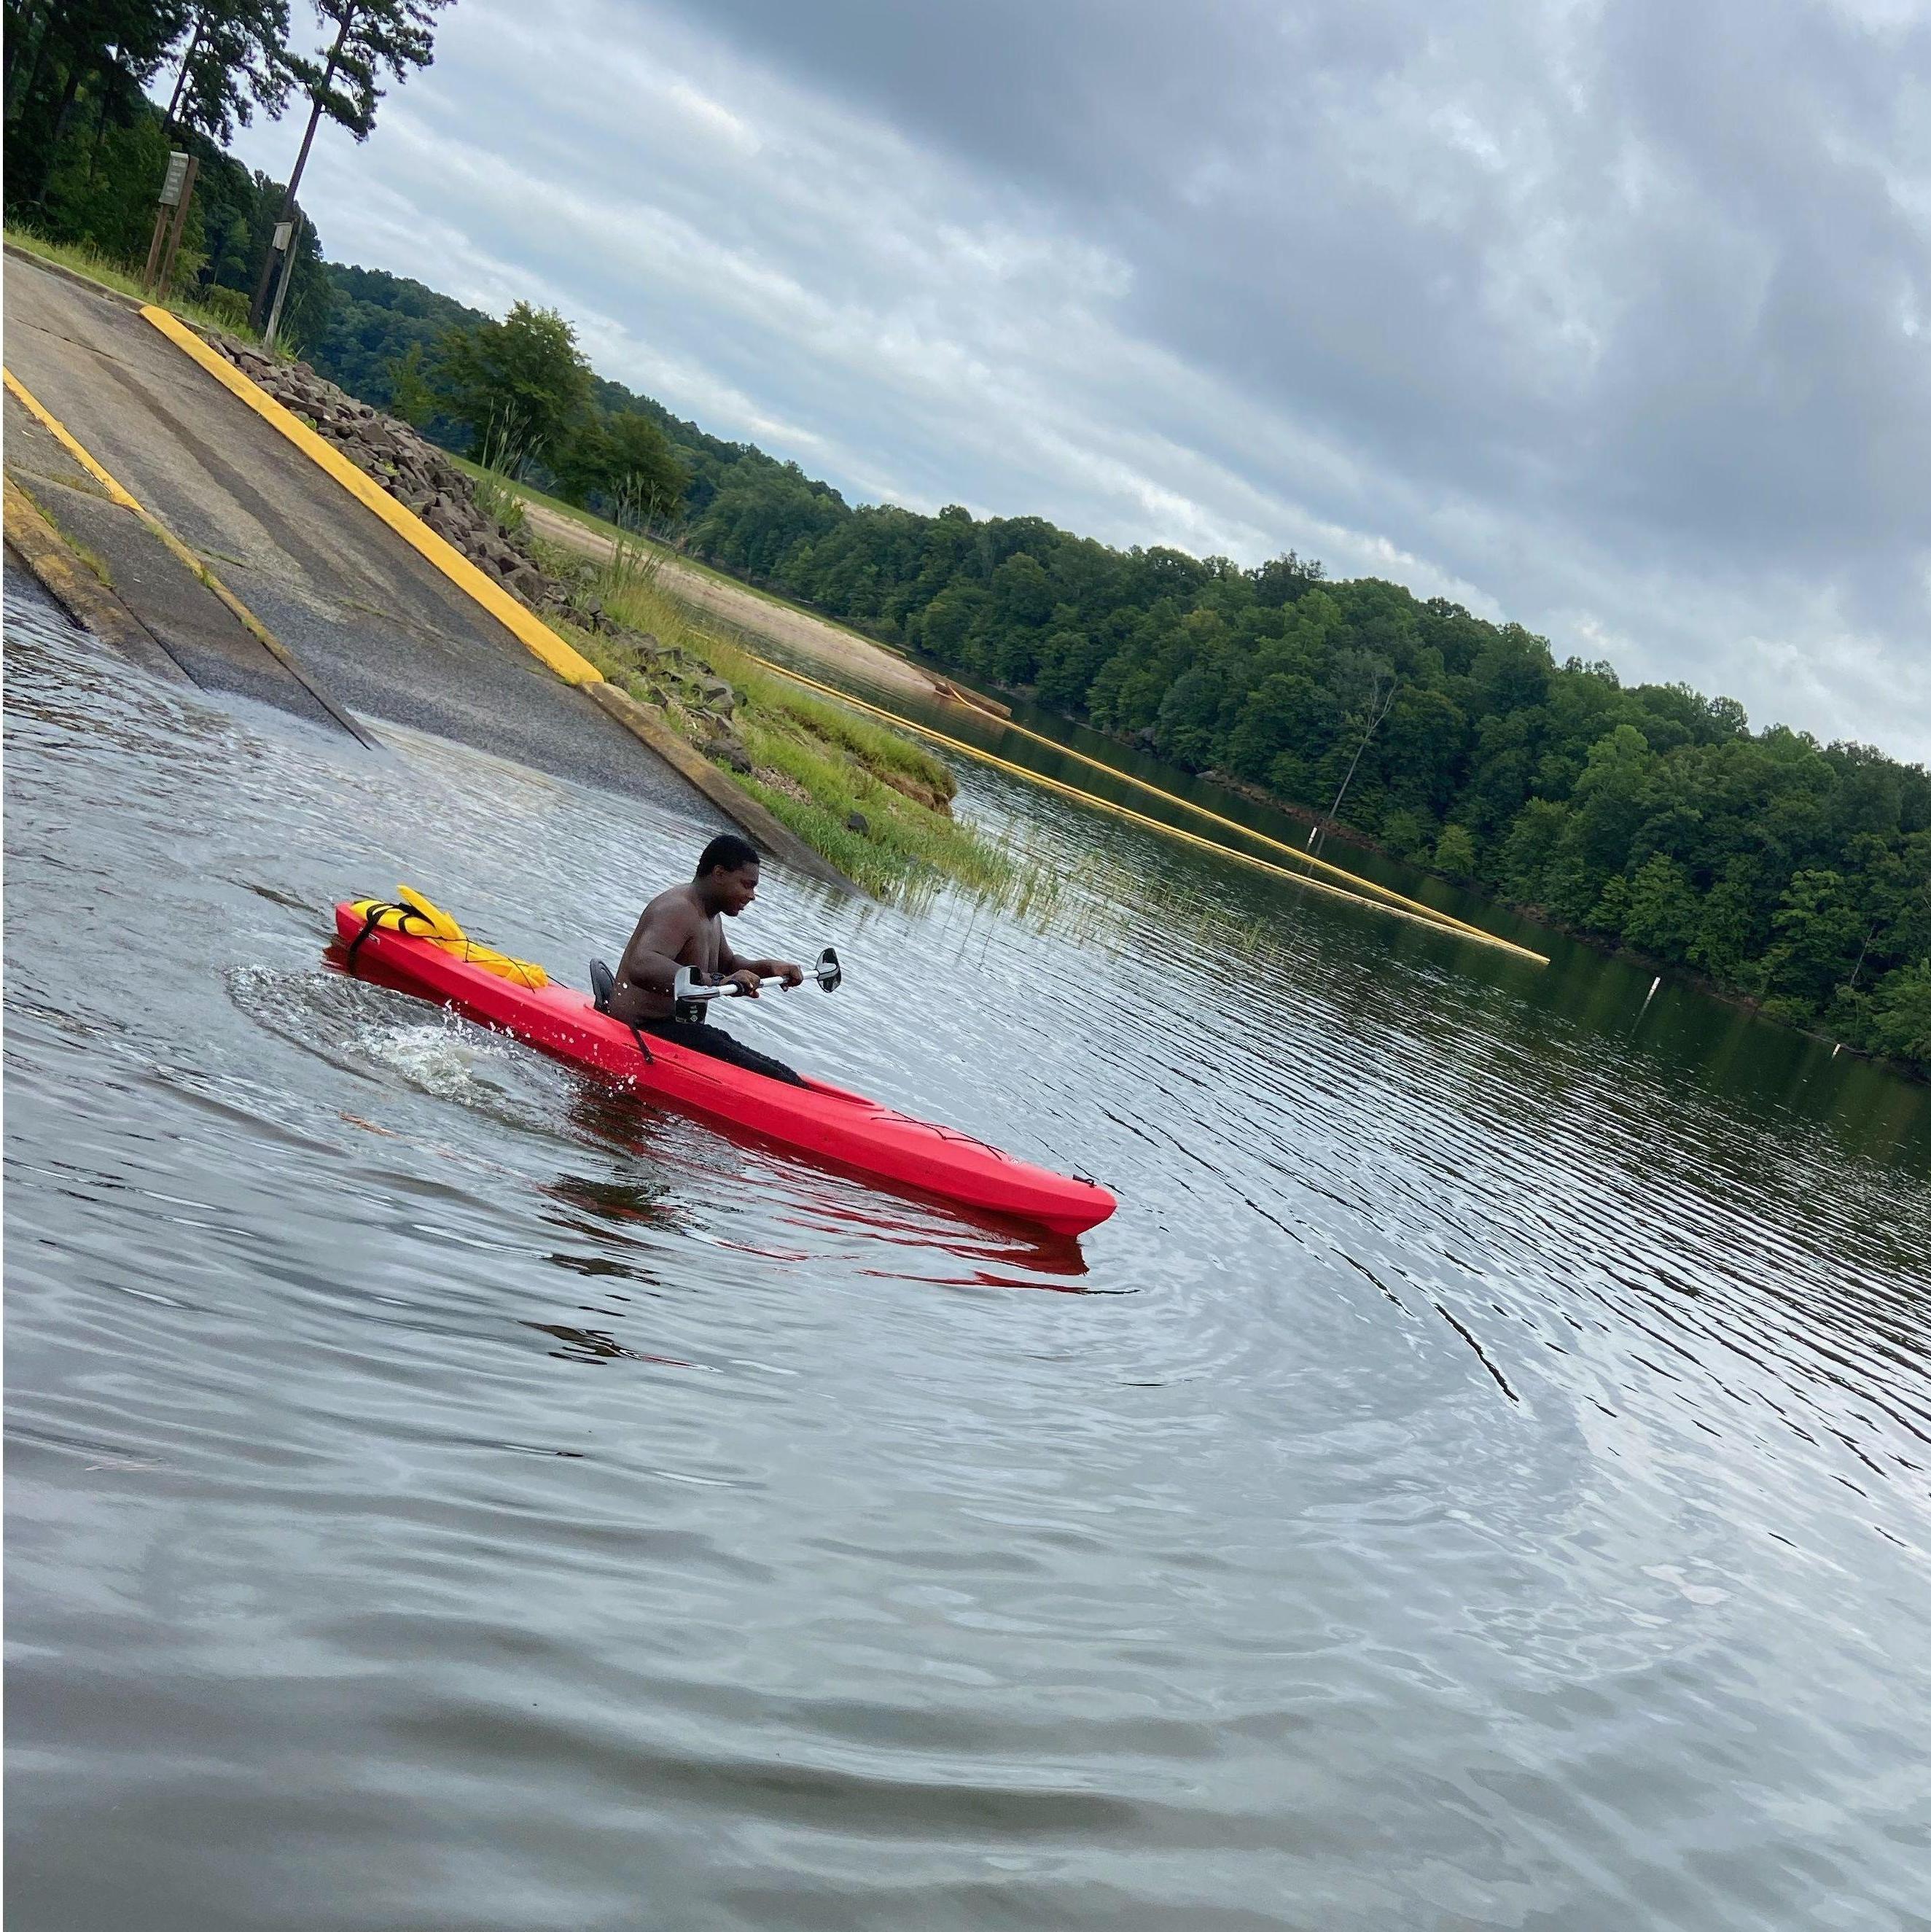 Charlie's first time kayaking